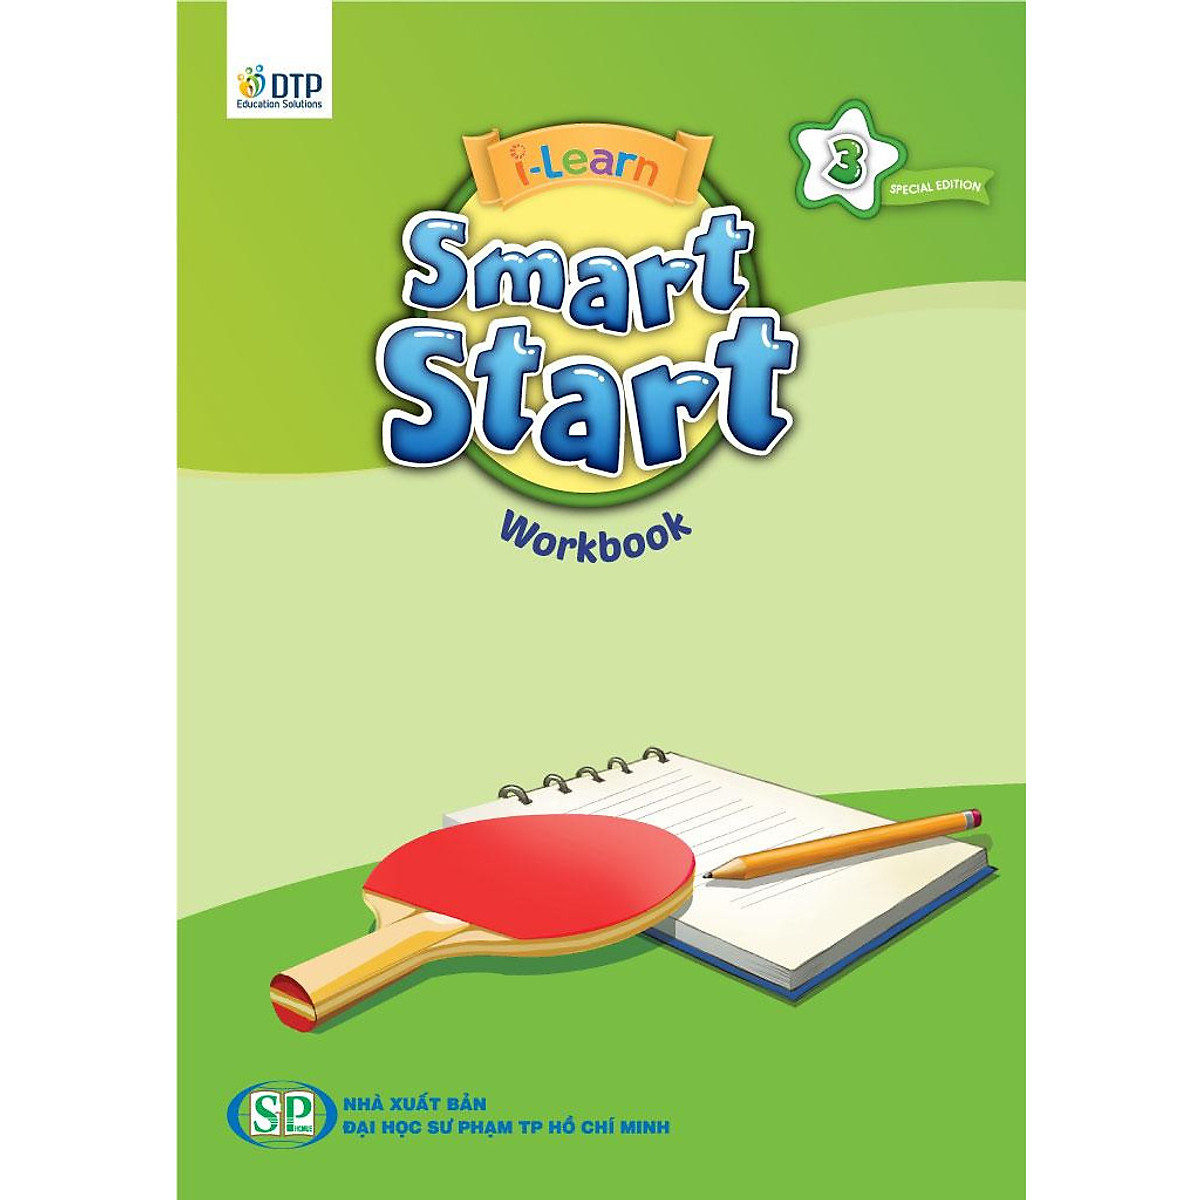 I-Learn Smart Start 3 Workbook Special Edition